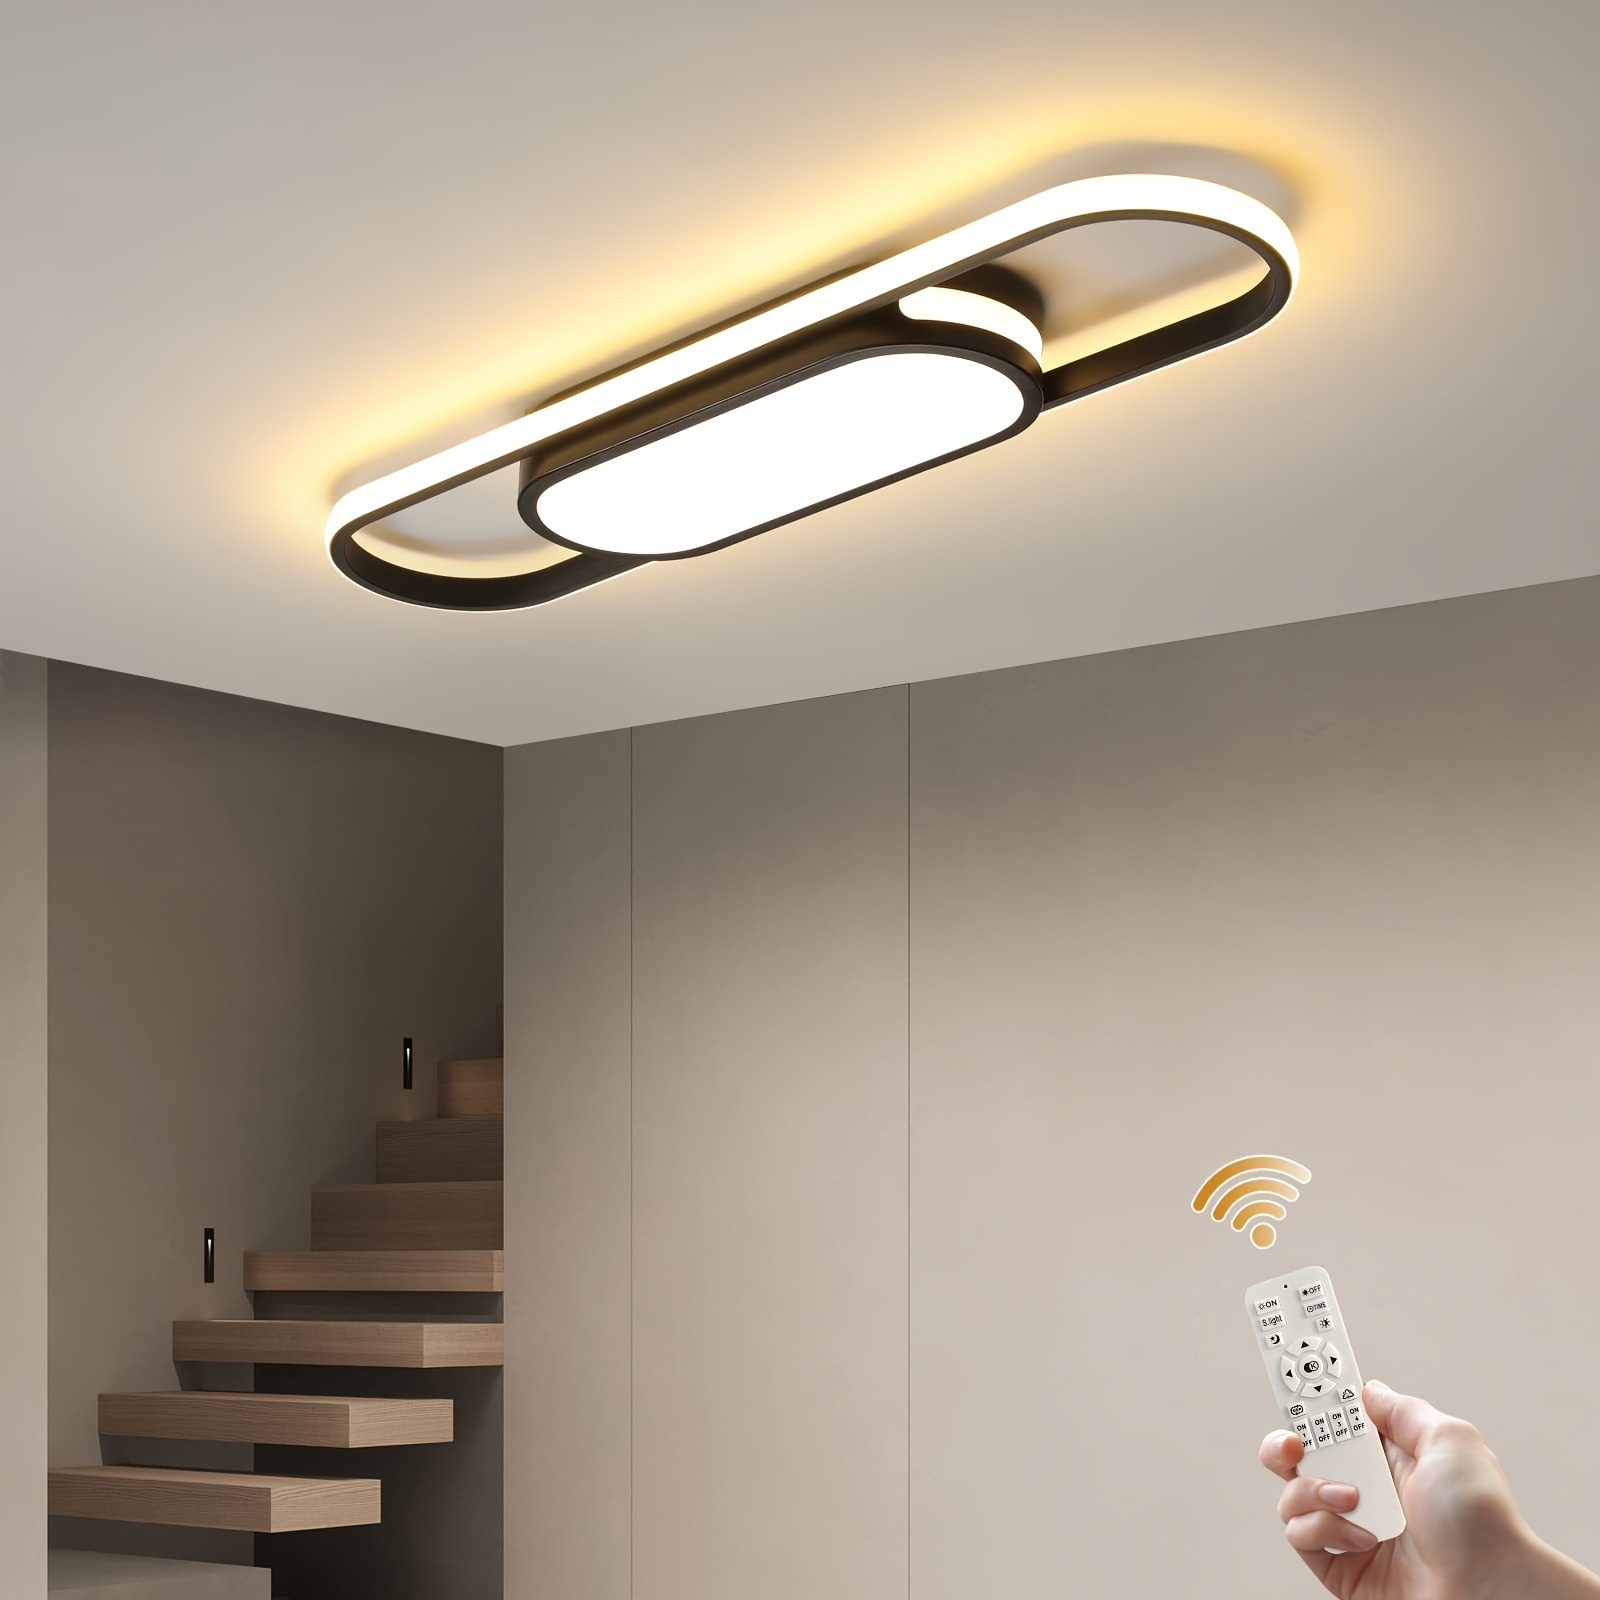 

Modern Led Linear Ceiling Lights Dimmable Led Ceiling Lamp With Remote Control Acrylic Flush Mount Ceiling Lighting Fixtures For Living Room Kitchen Dining Room (3000-6500k/black)